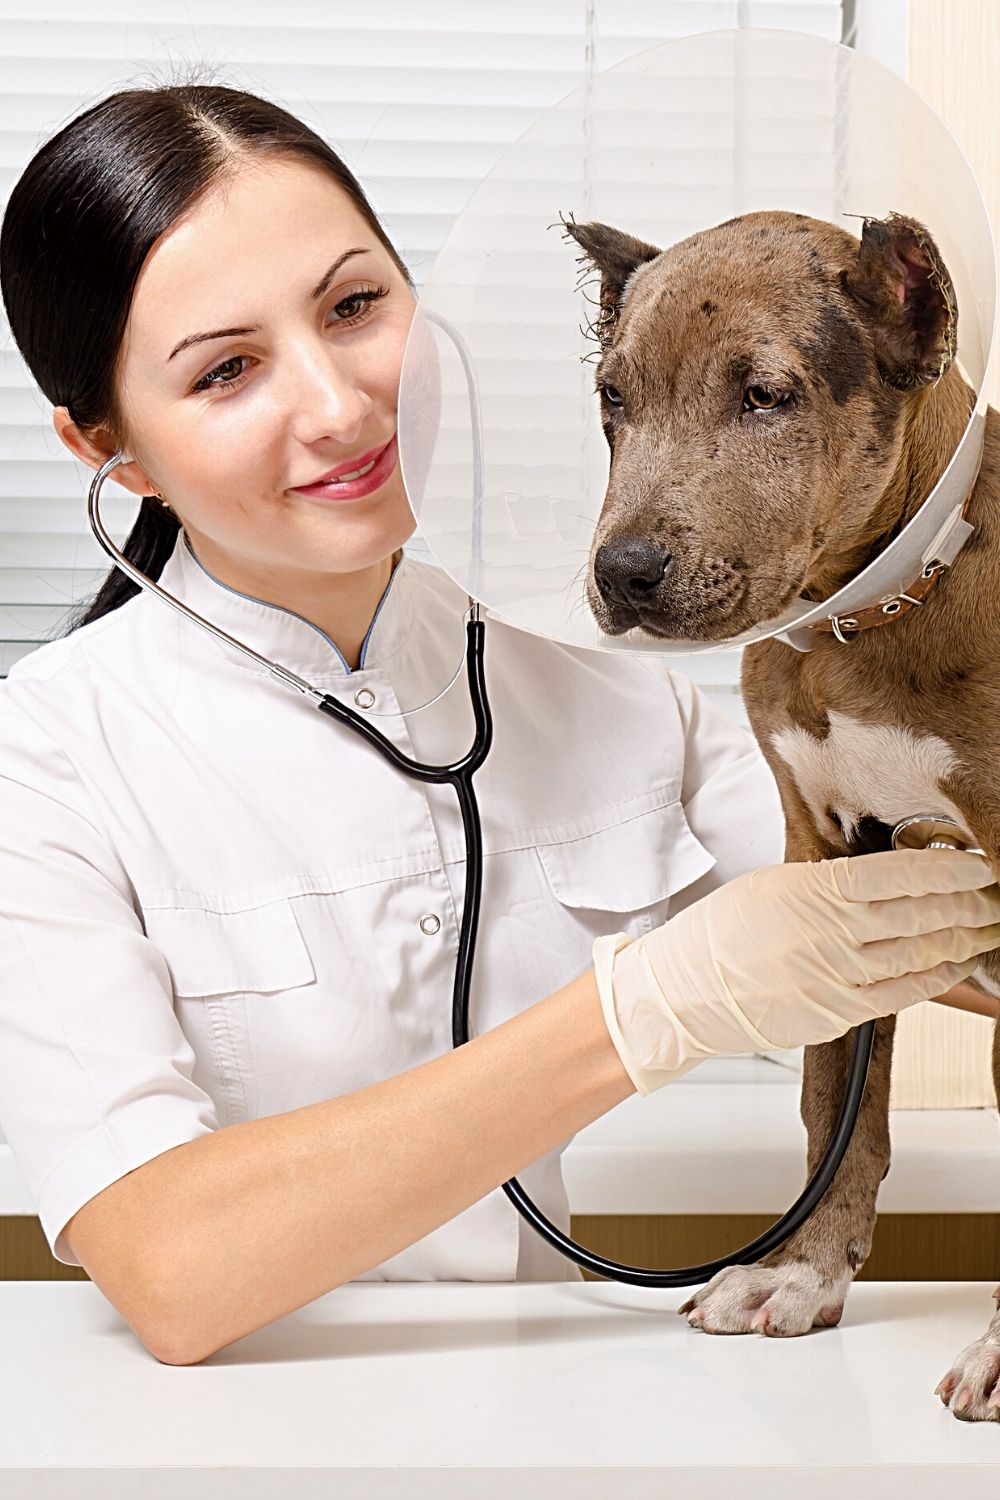 Veterinarians aren't partial to tail-docking for Pit Bulls as they believe it's a bad practice